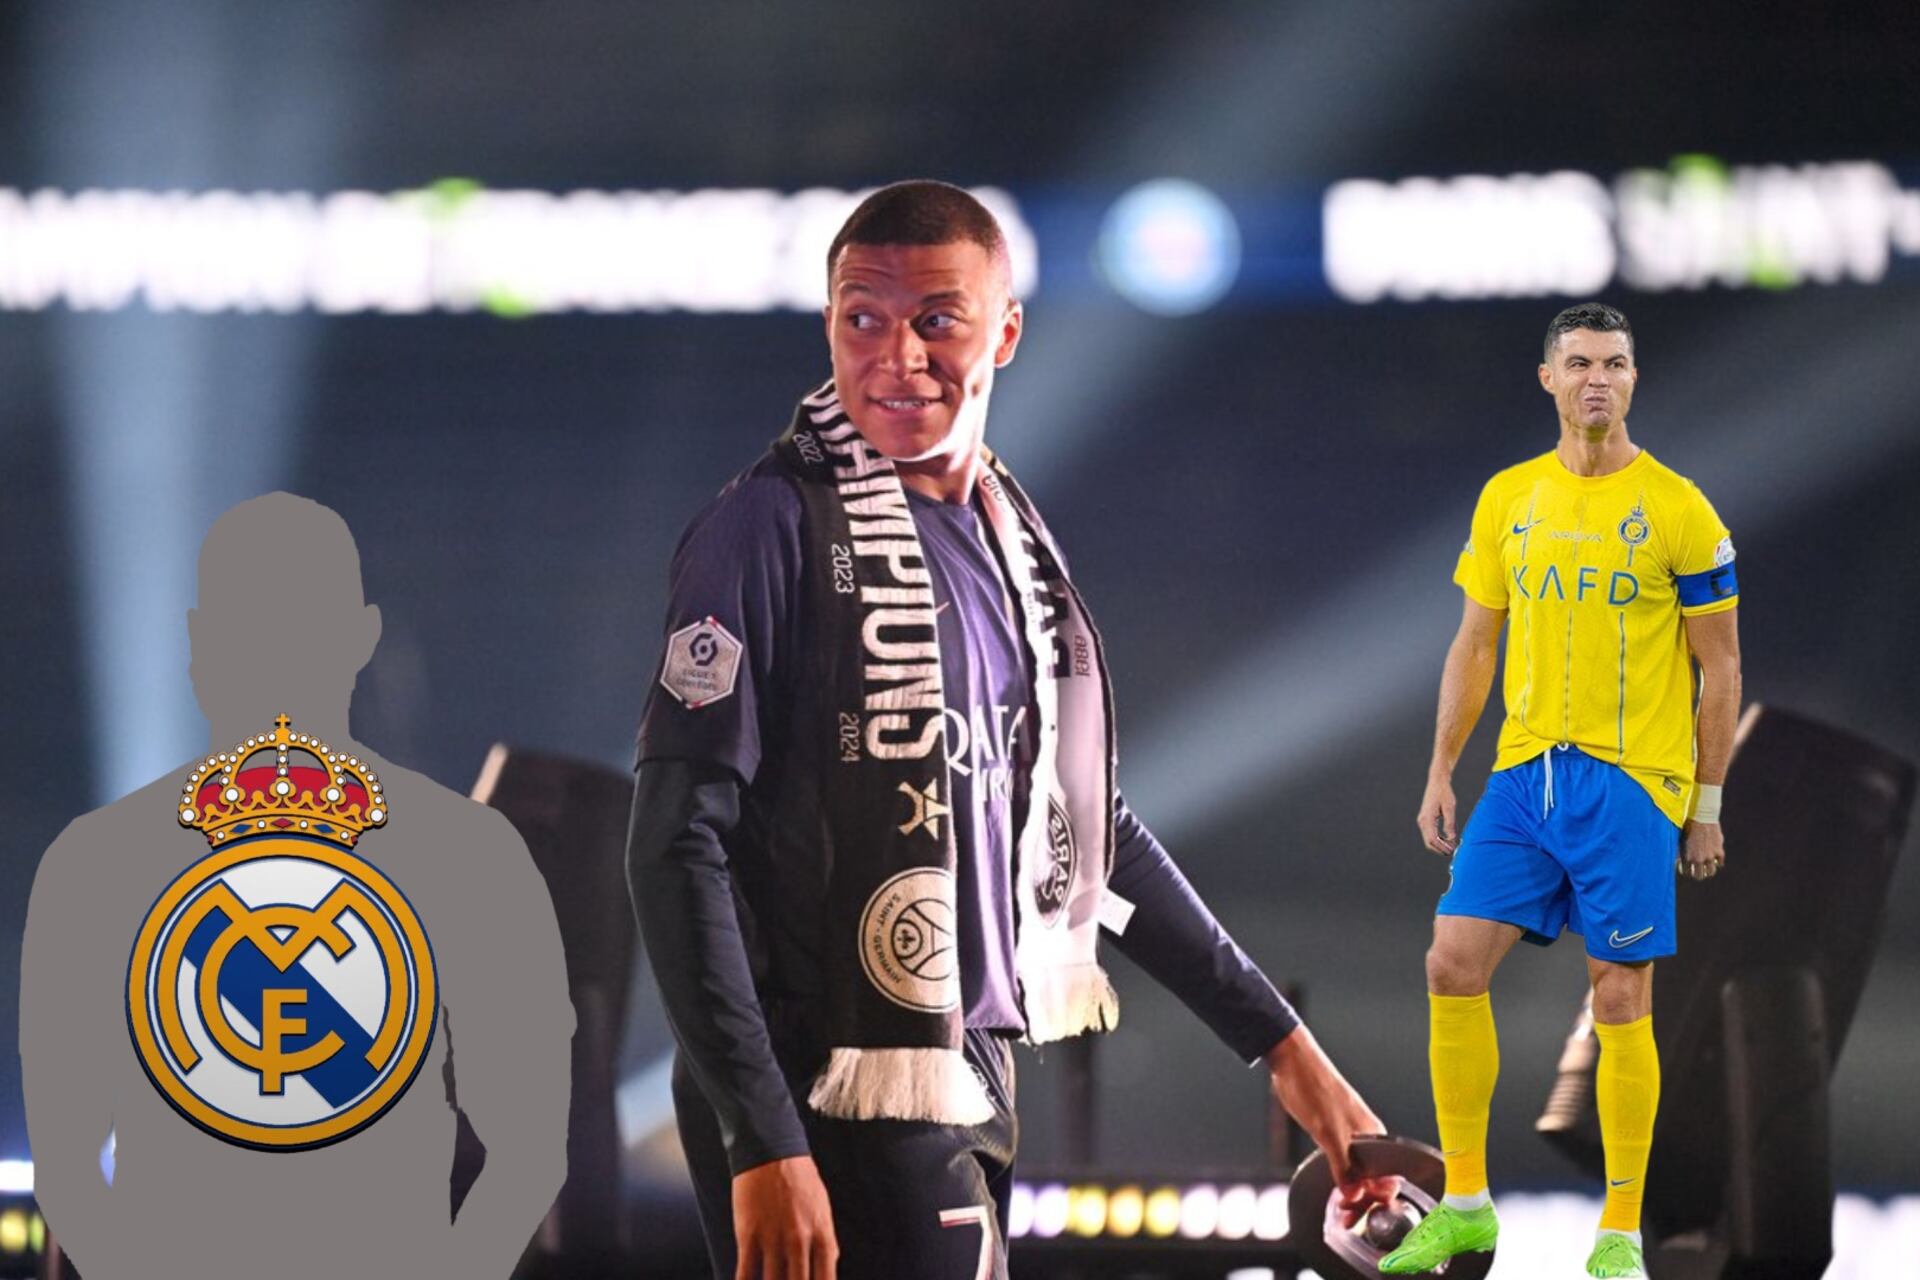 Mbappé would have a new neighbor, Real Madrid legend who would leave CR7 in Saudi and be Kylian’s neighbor in Madrid